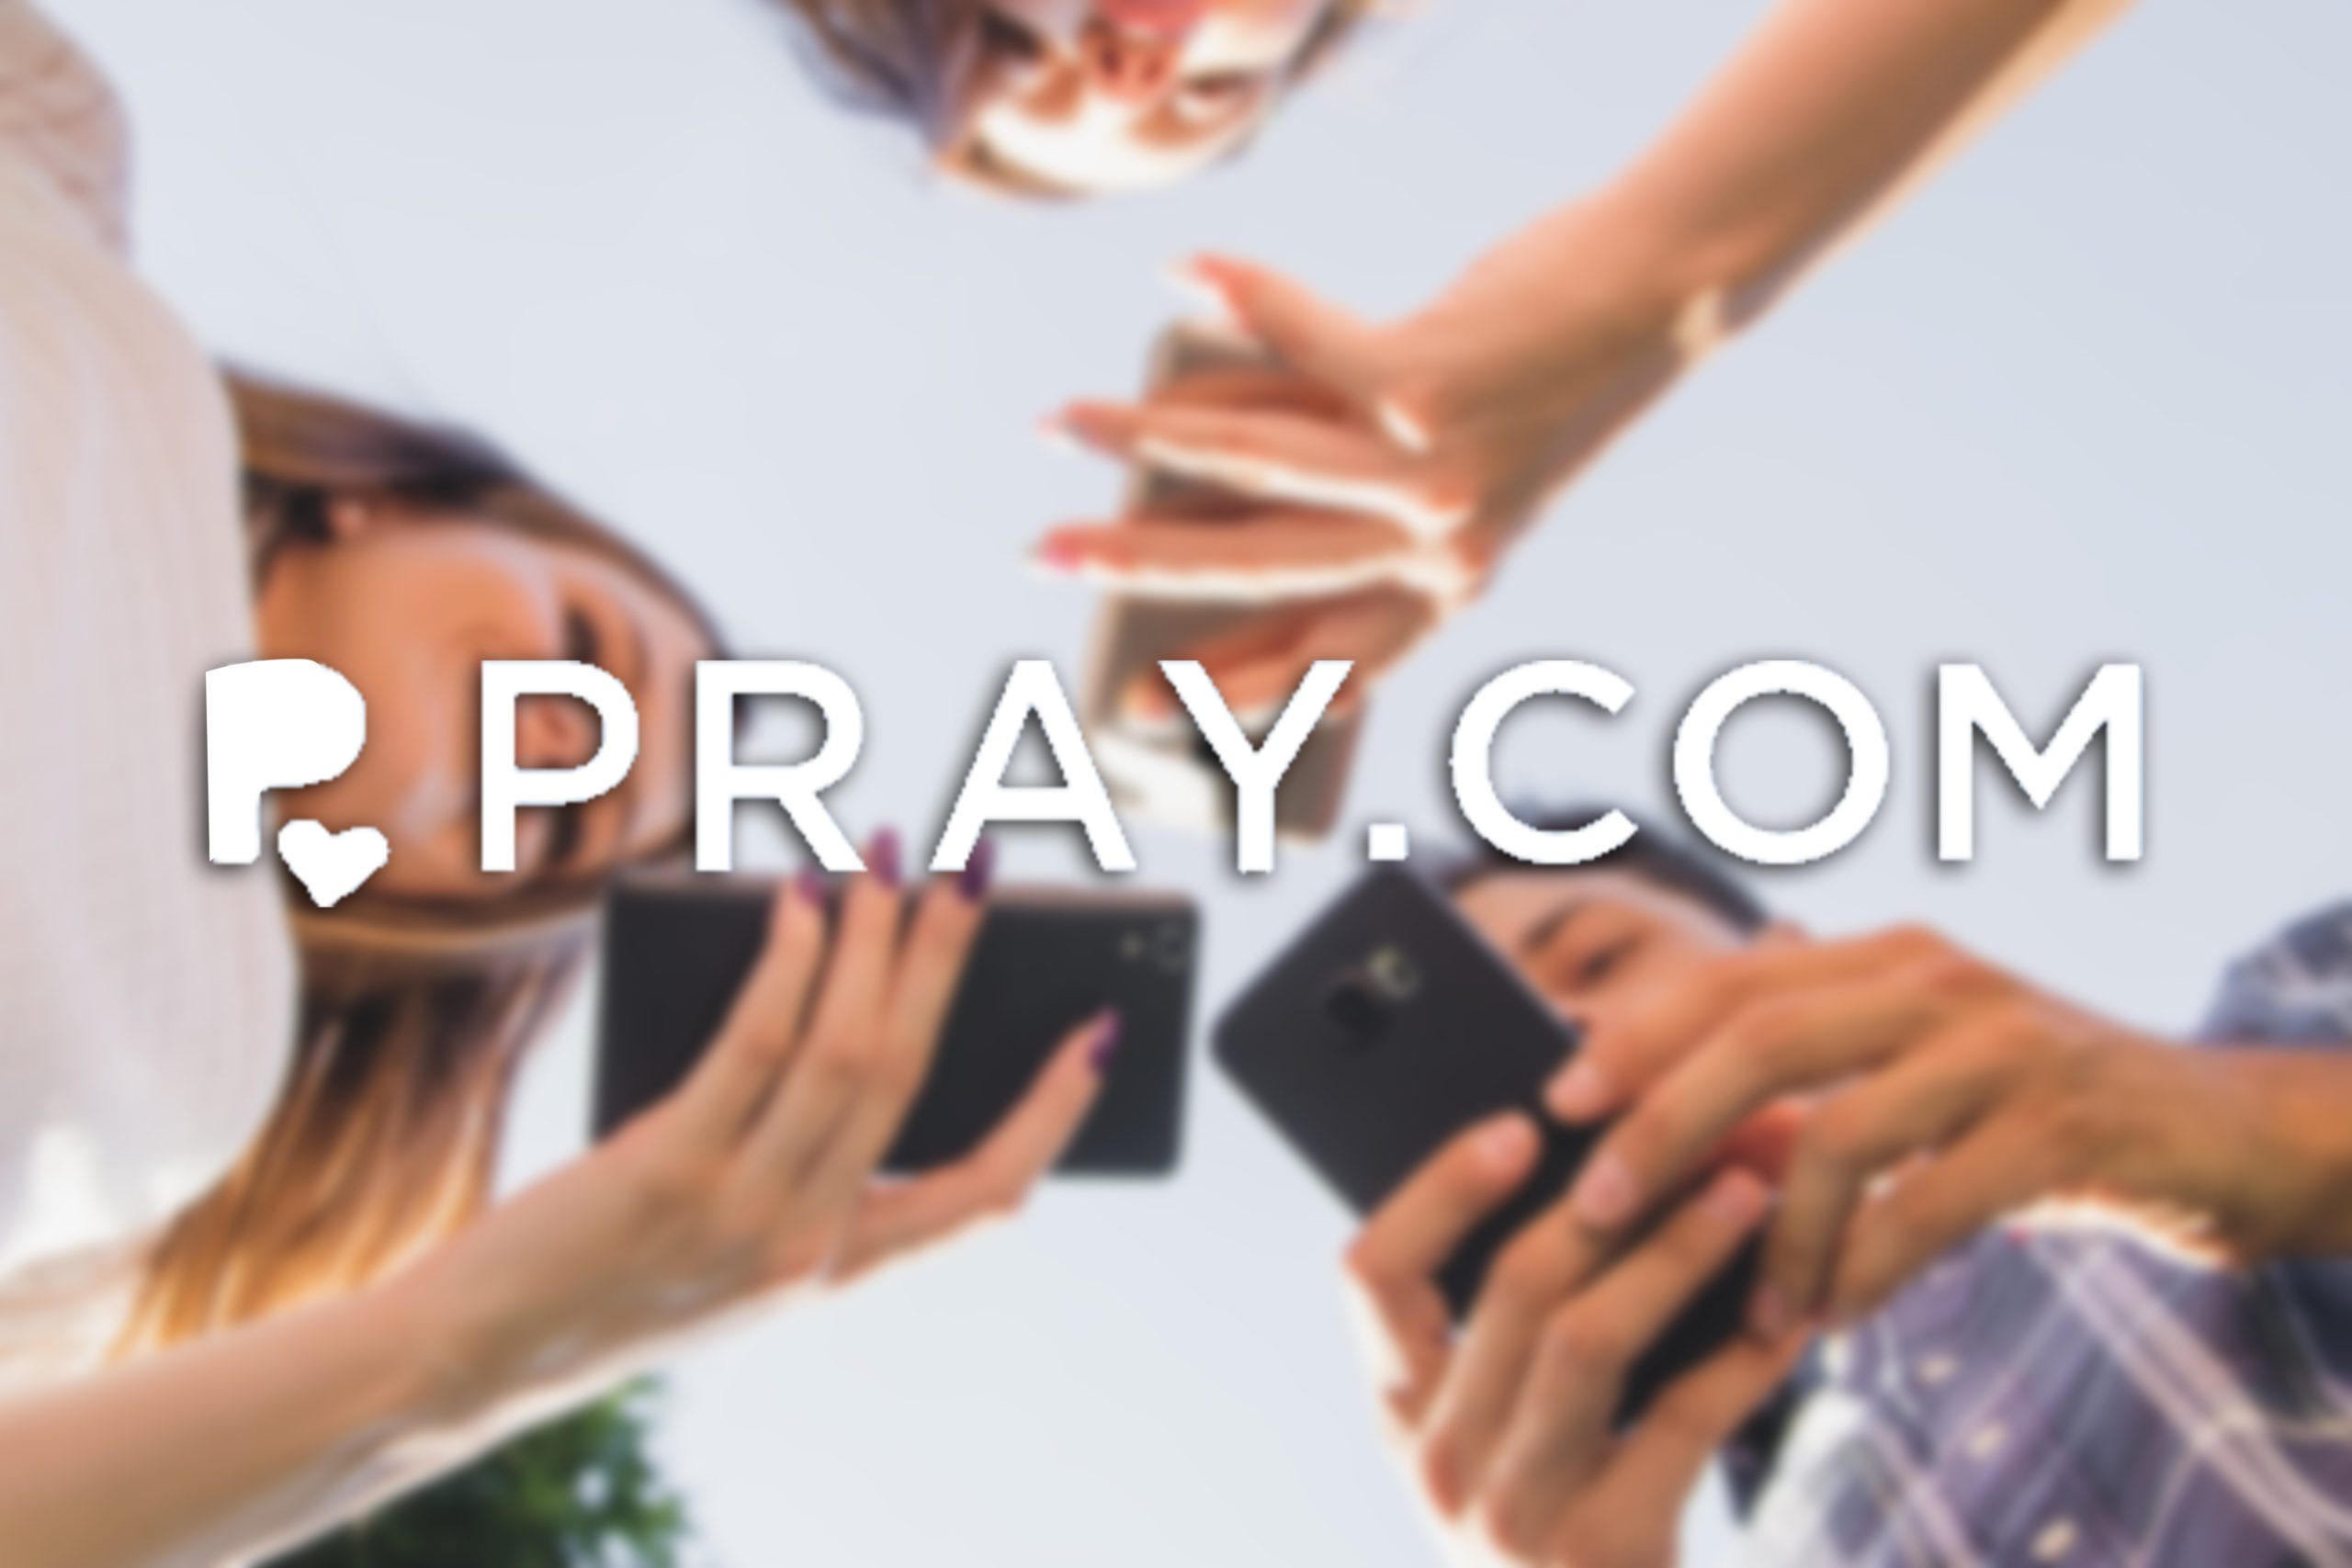 You are currently viewing Pray.com Exposed Personal Data of 10 Million Users